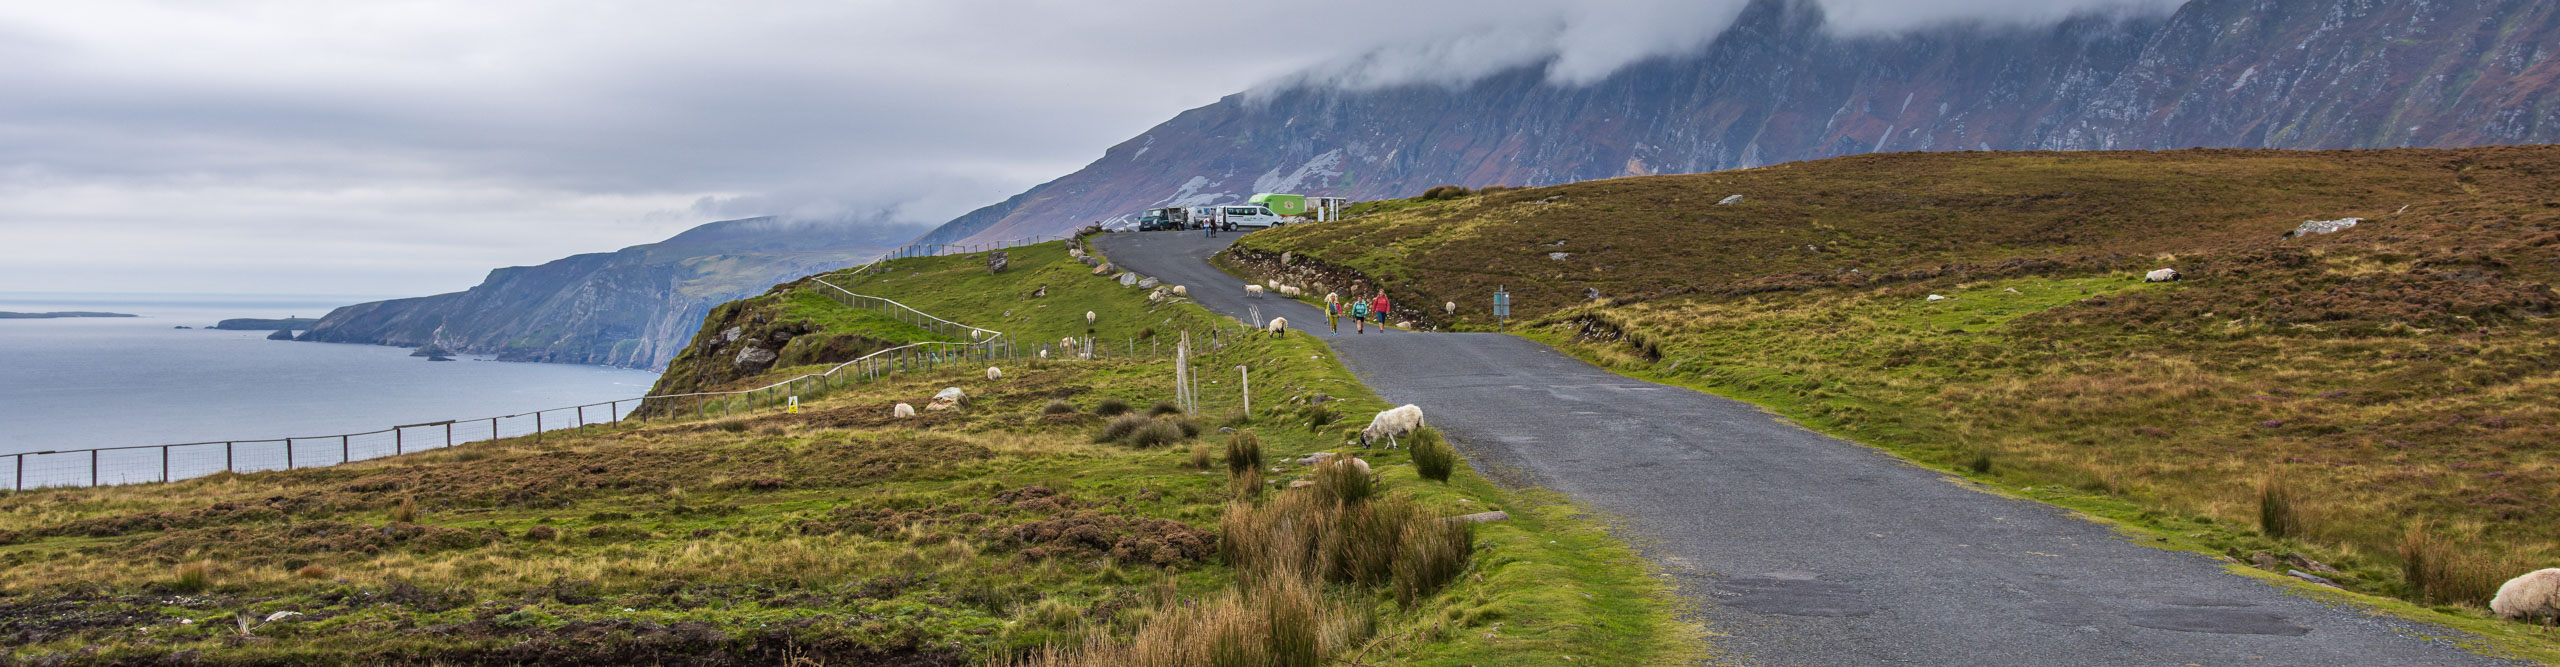 People and sheep on road near the water in Teelin, Ireland on a cloudy day 